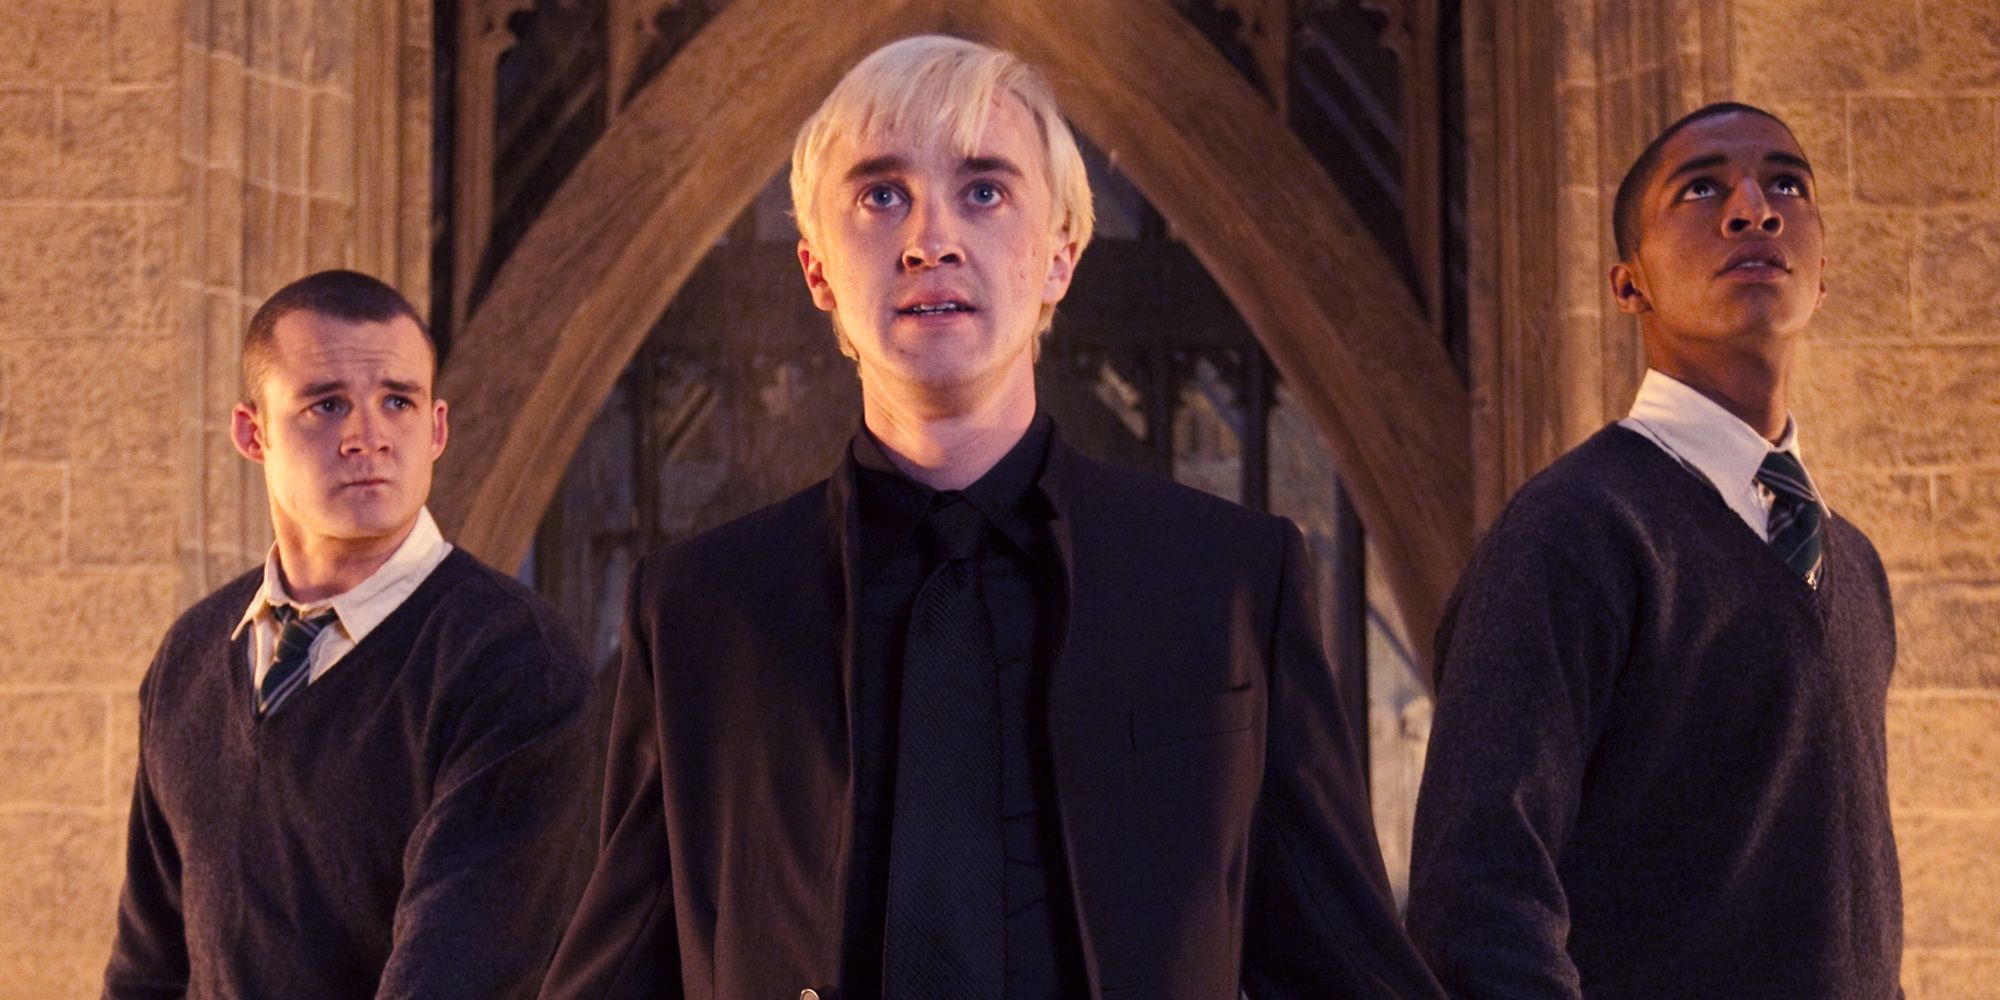 Draco Malfoy standing with Goyle and Blaise in Harry Potter and the Deathly Hallows